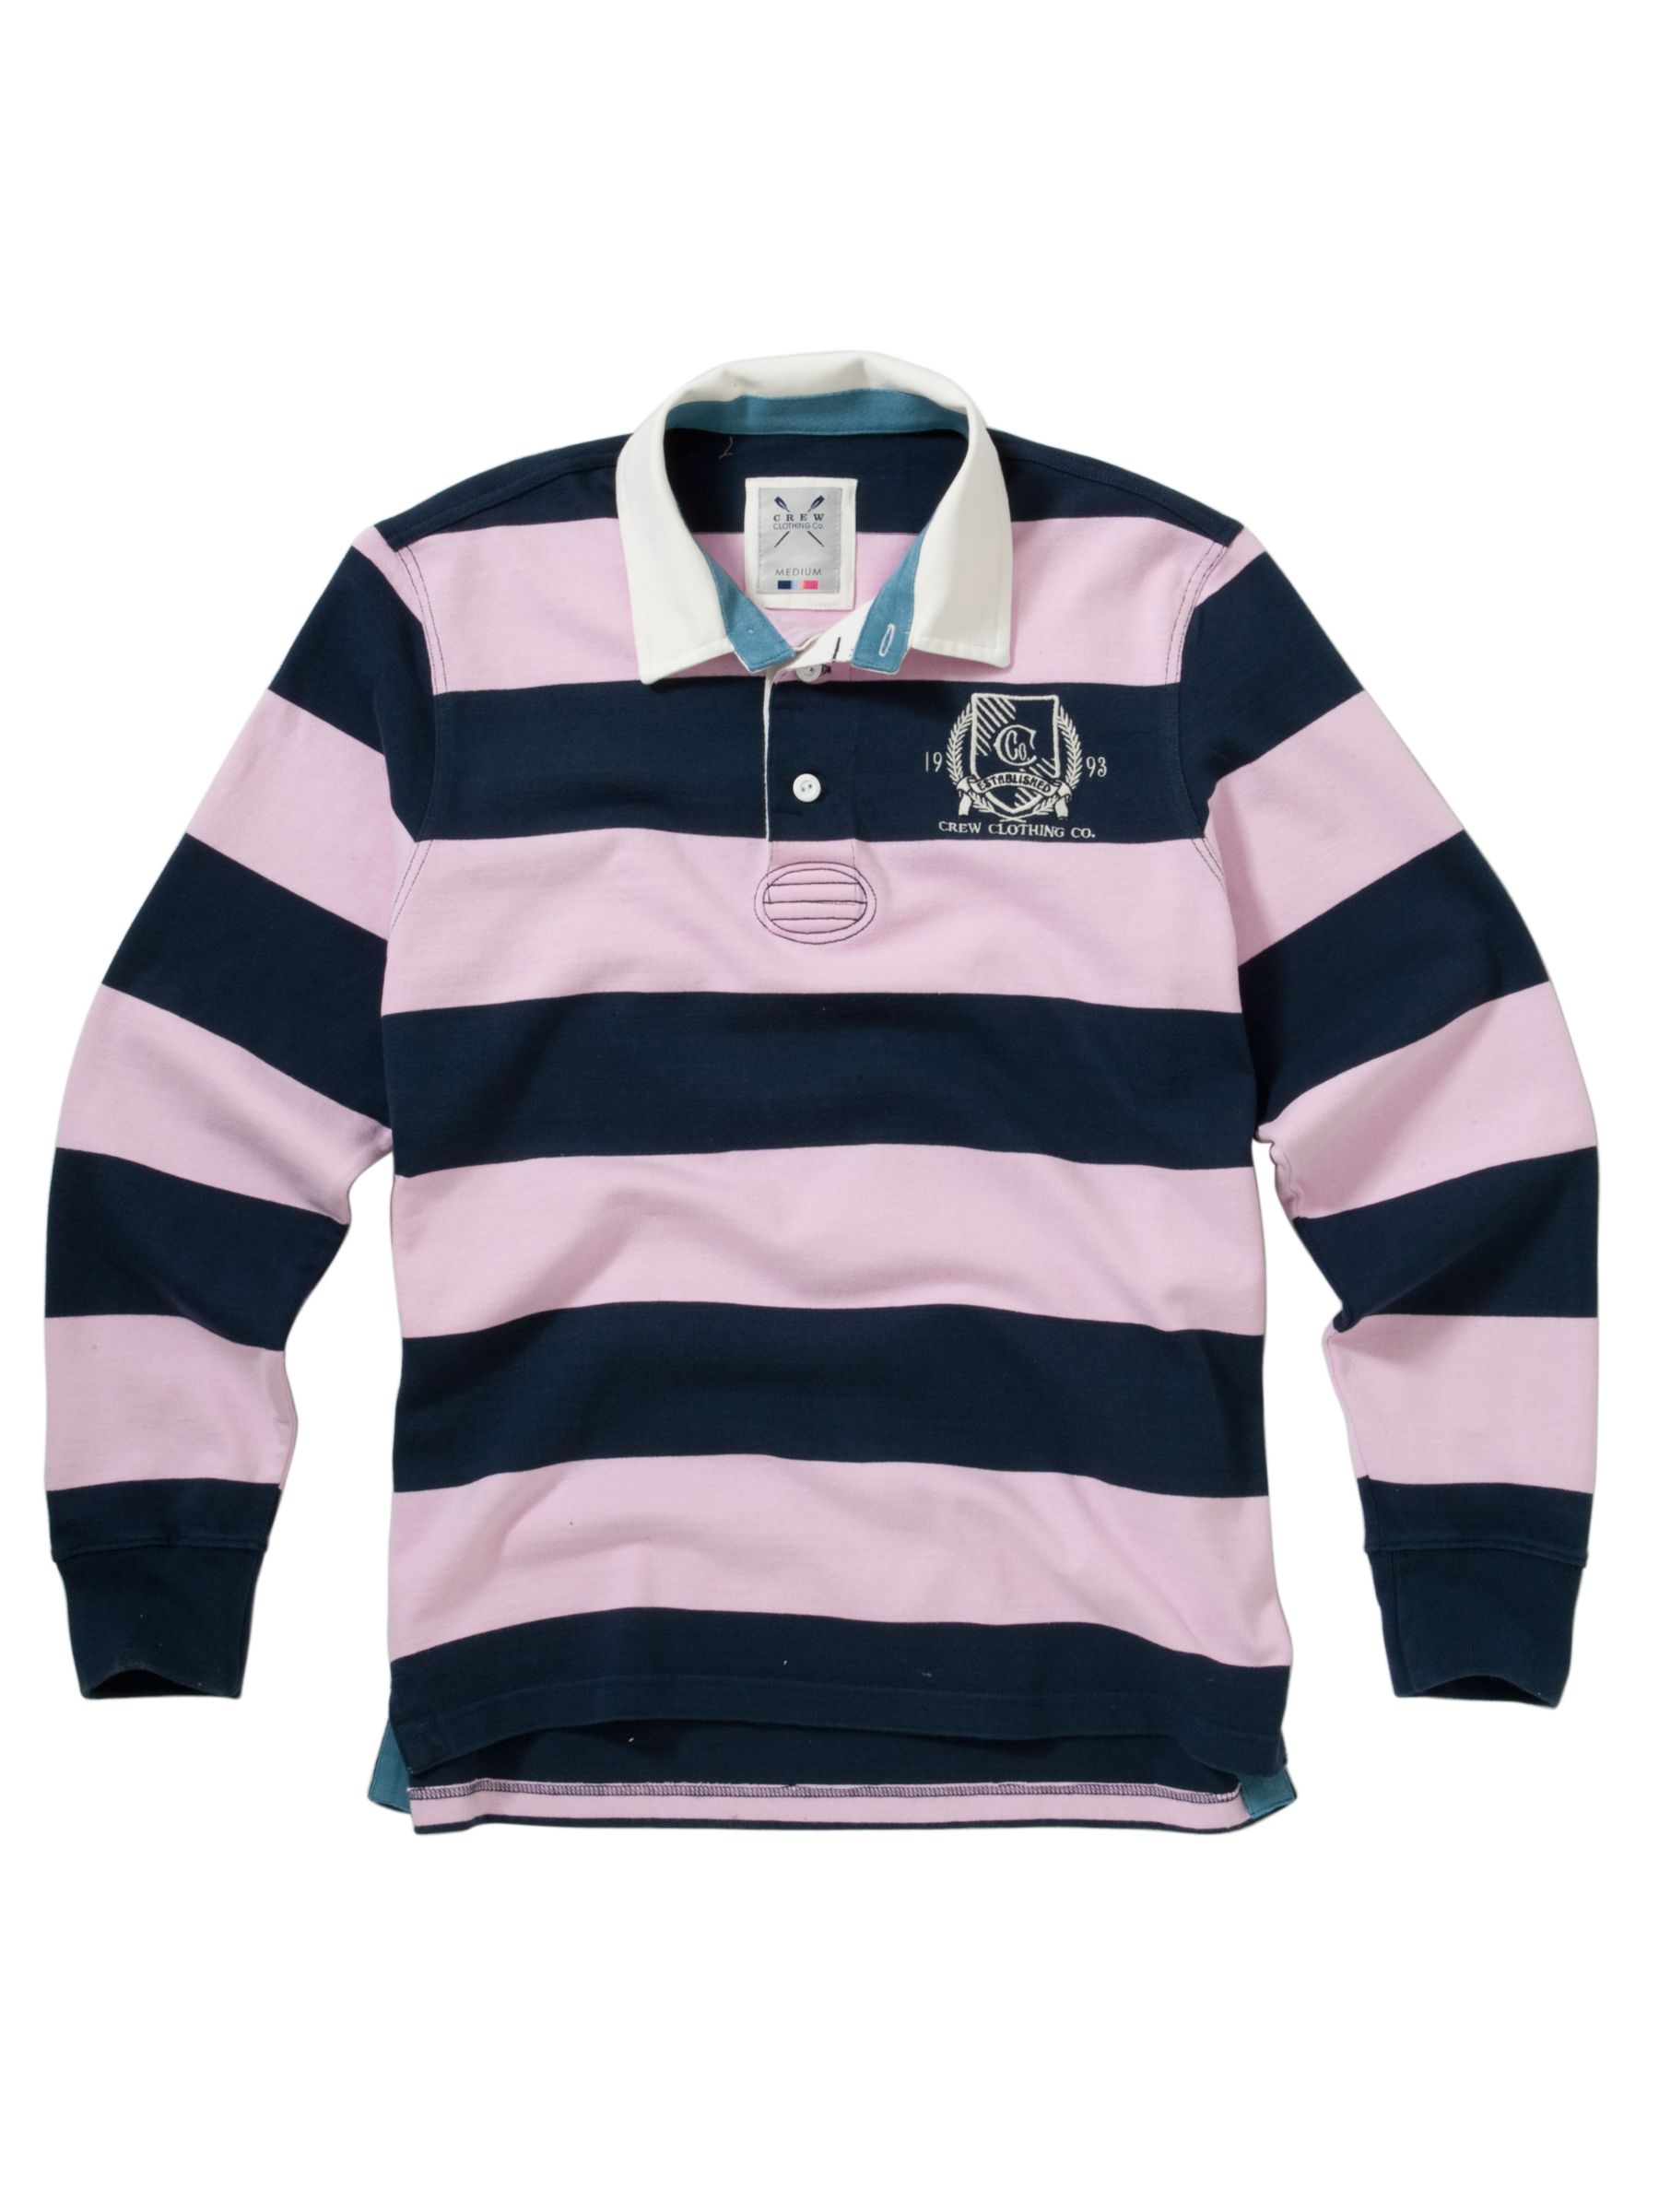 Crew Clothing College Rugby Shirt, Navy/pink